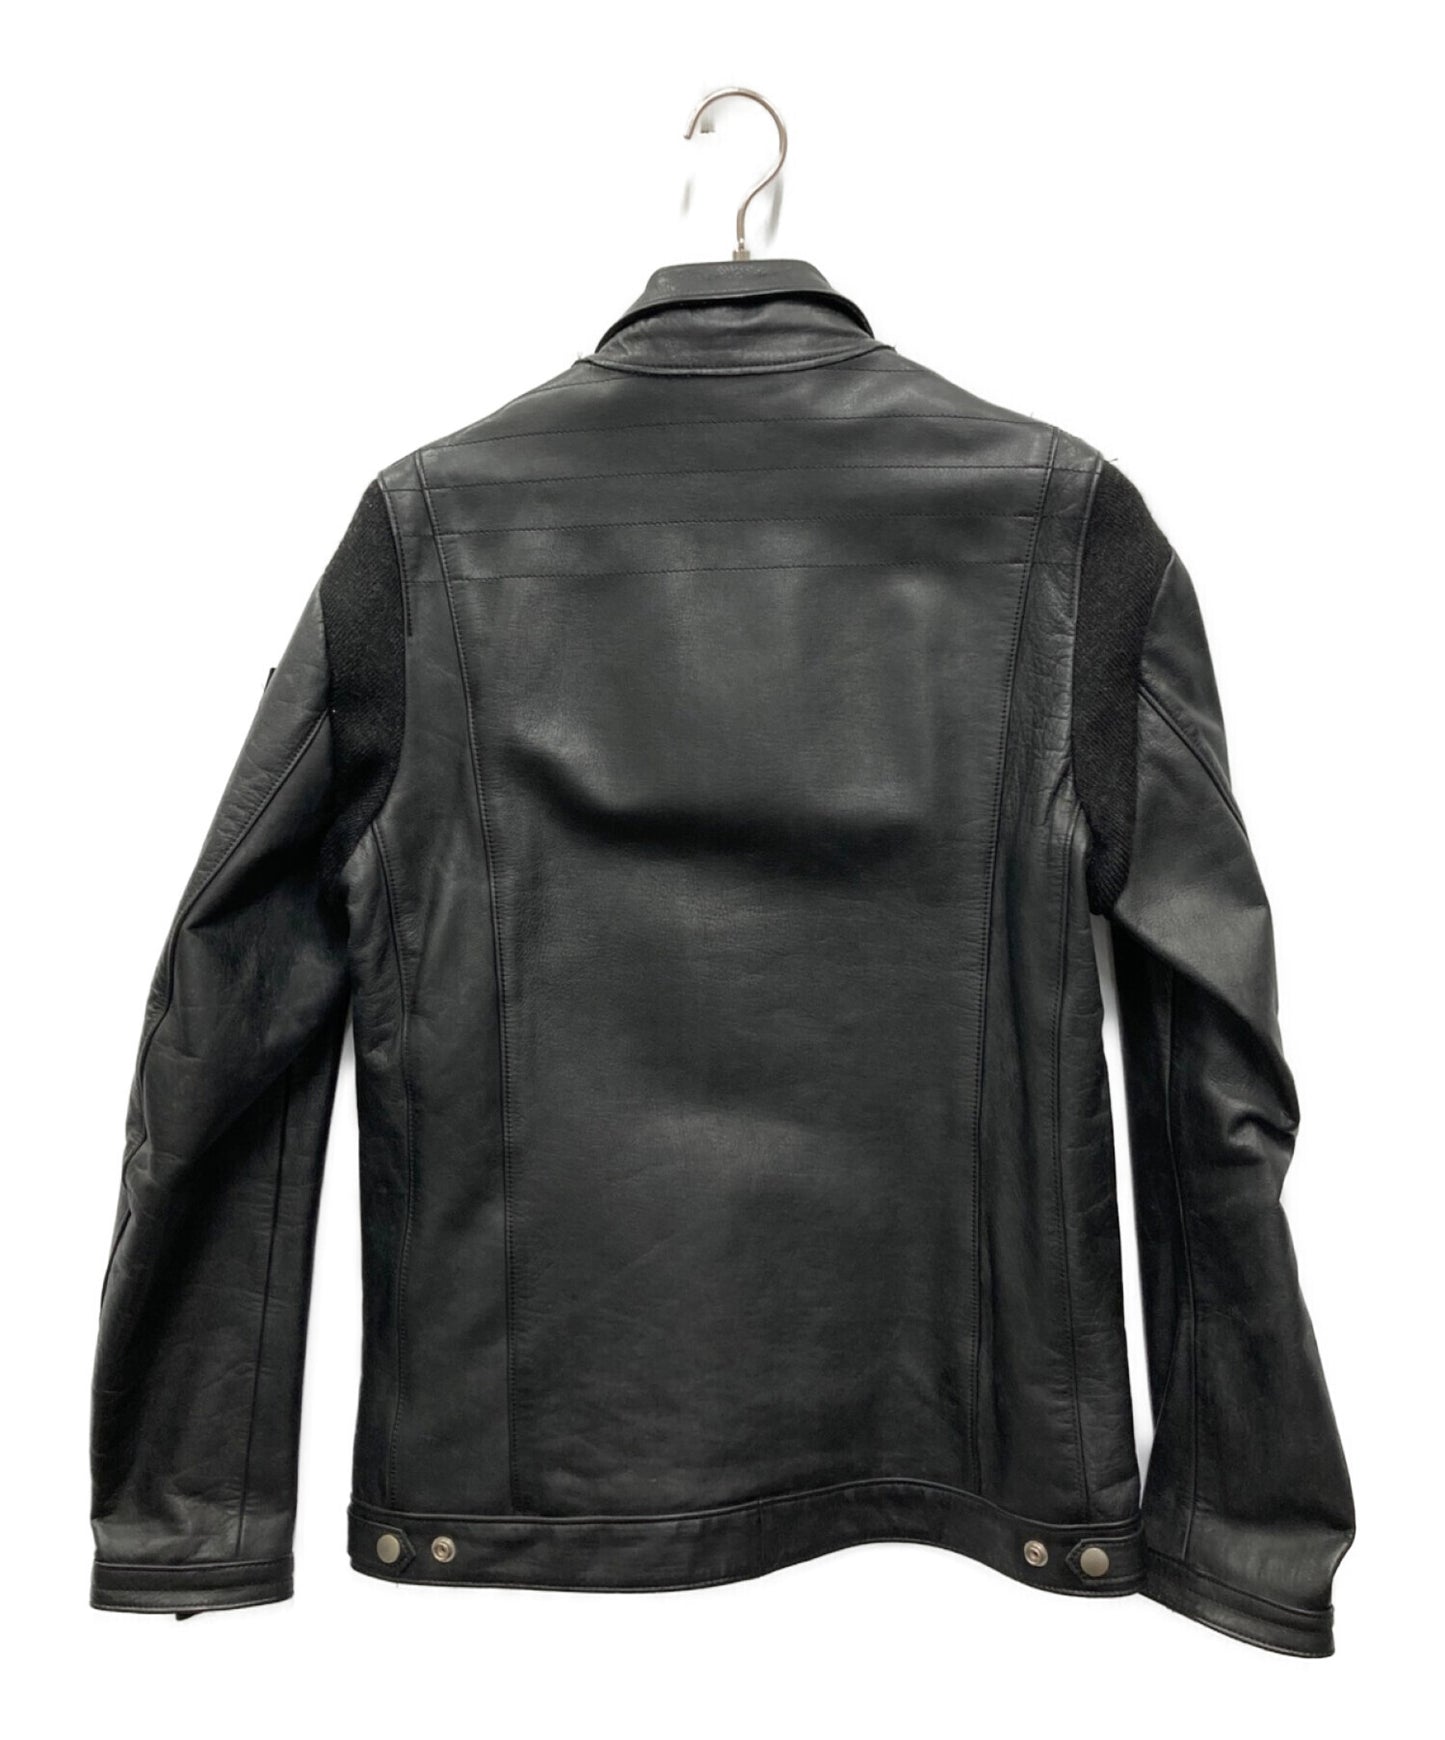 [Pre-owned] UNDERCOVERISM UISM Single Leather Riders Jacket with Knit Arm Switching D4207